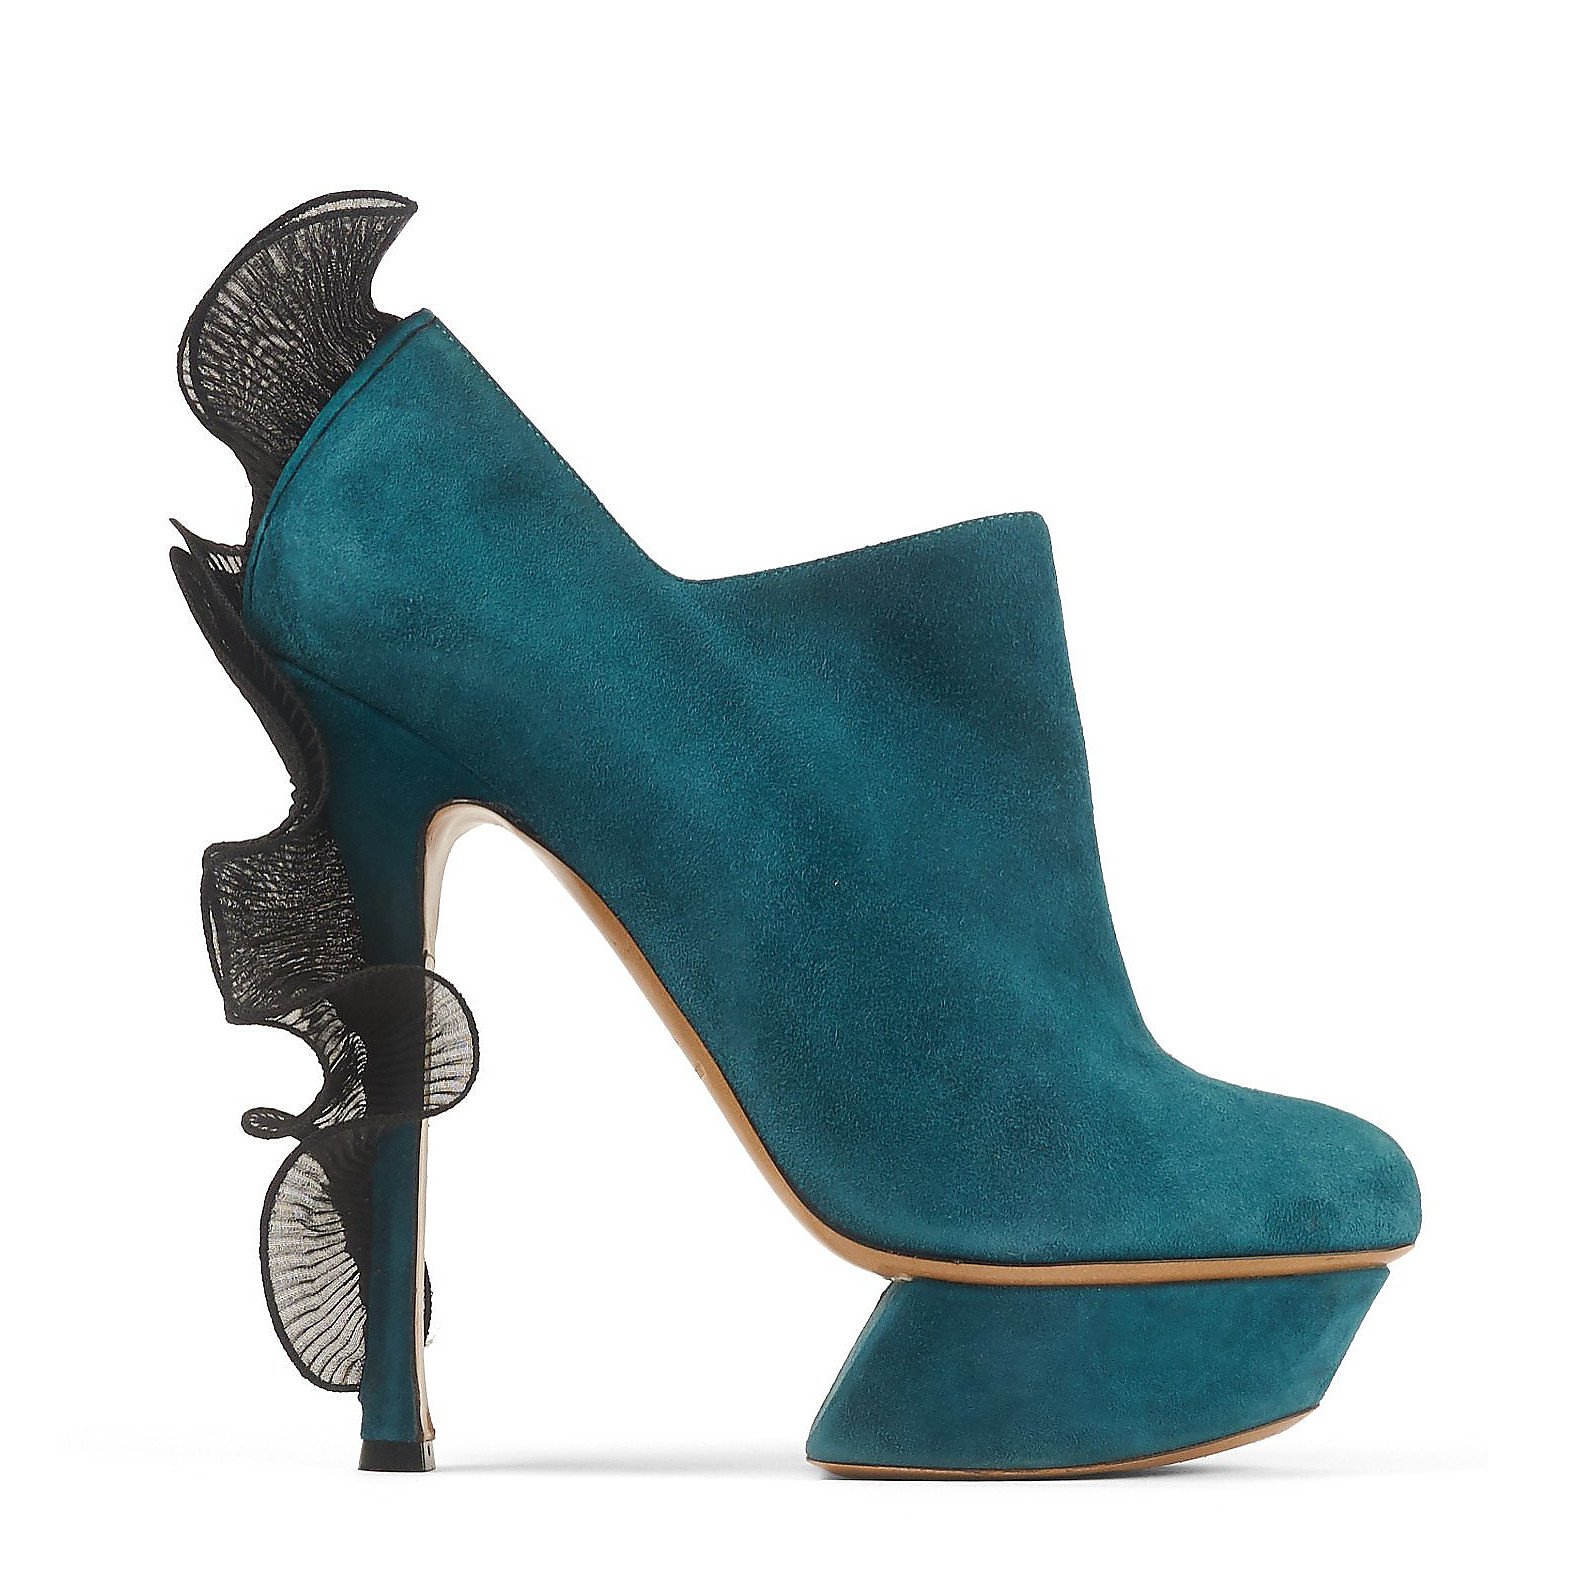 Nicholas Kirkwood Suede Ruffle-Trimmed Stiletto Ankle Boots